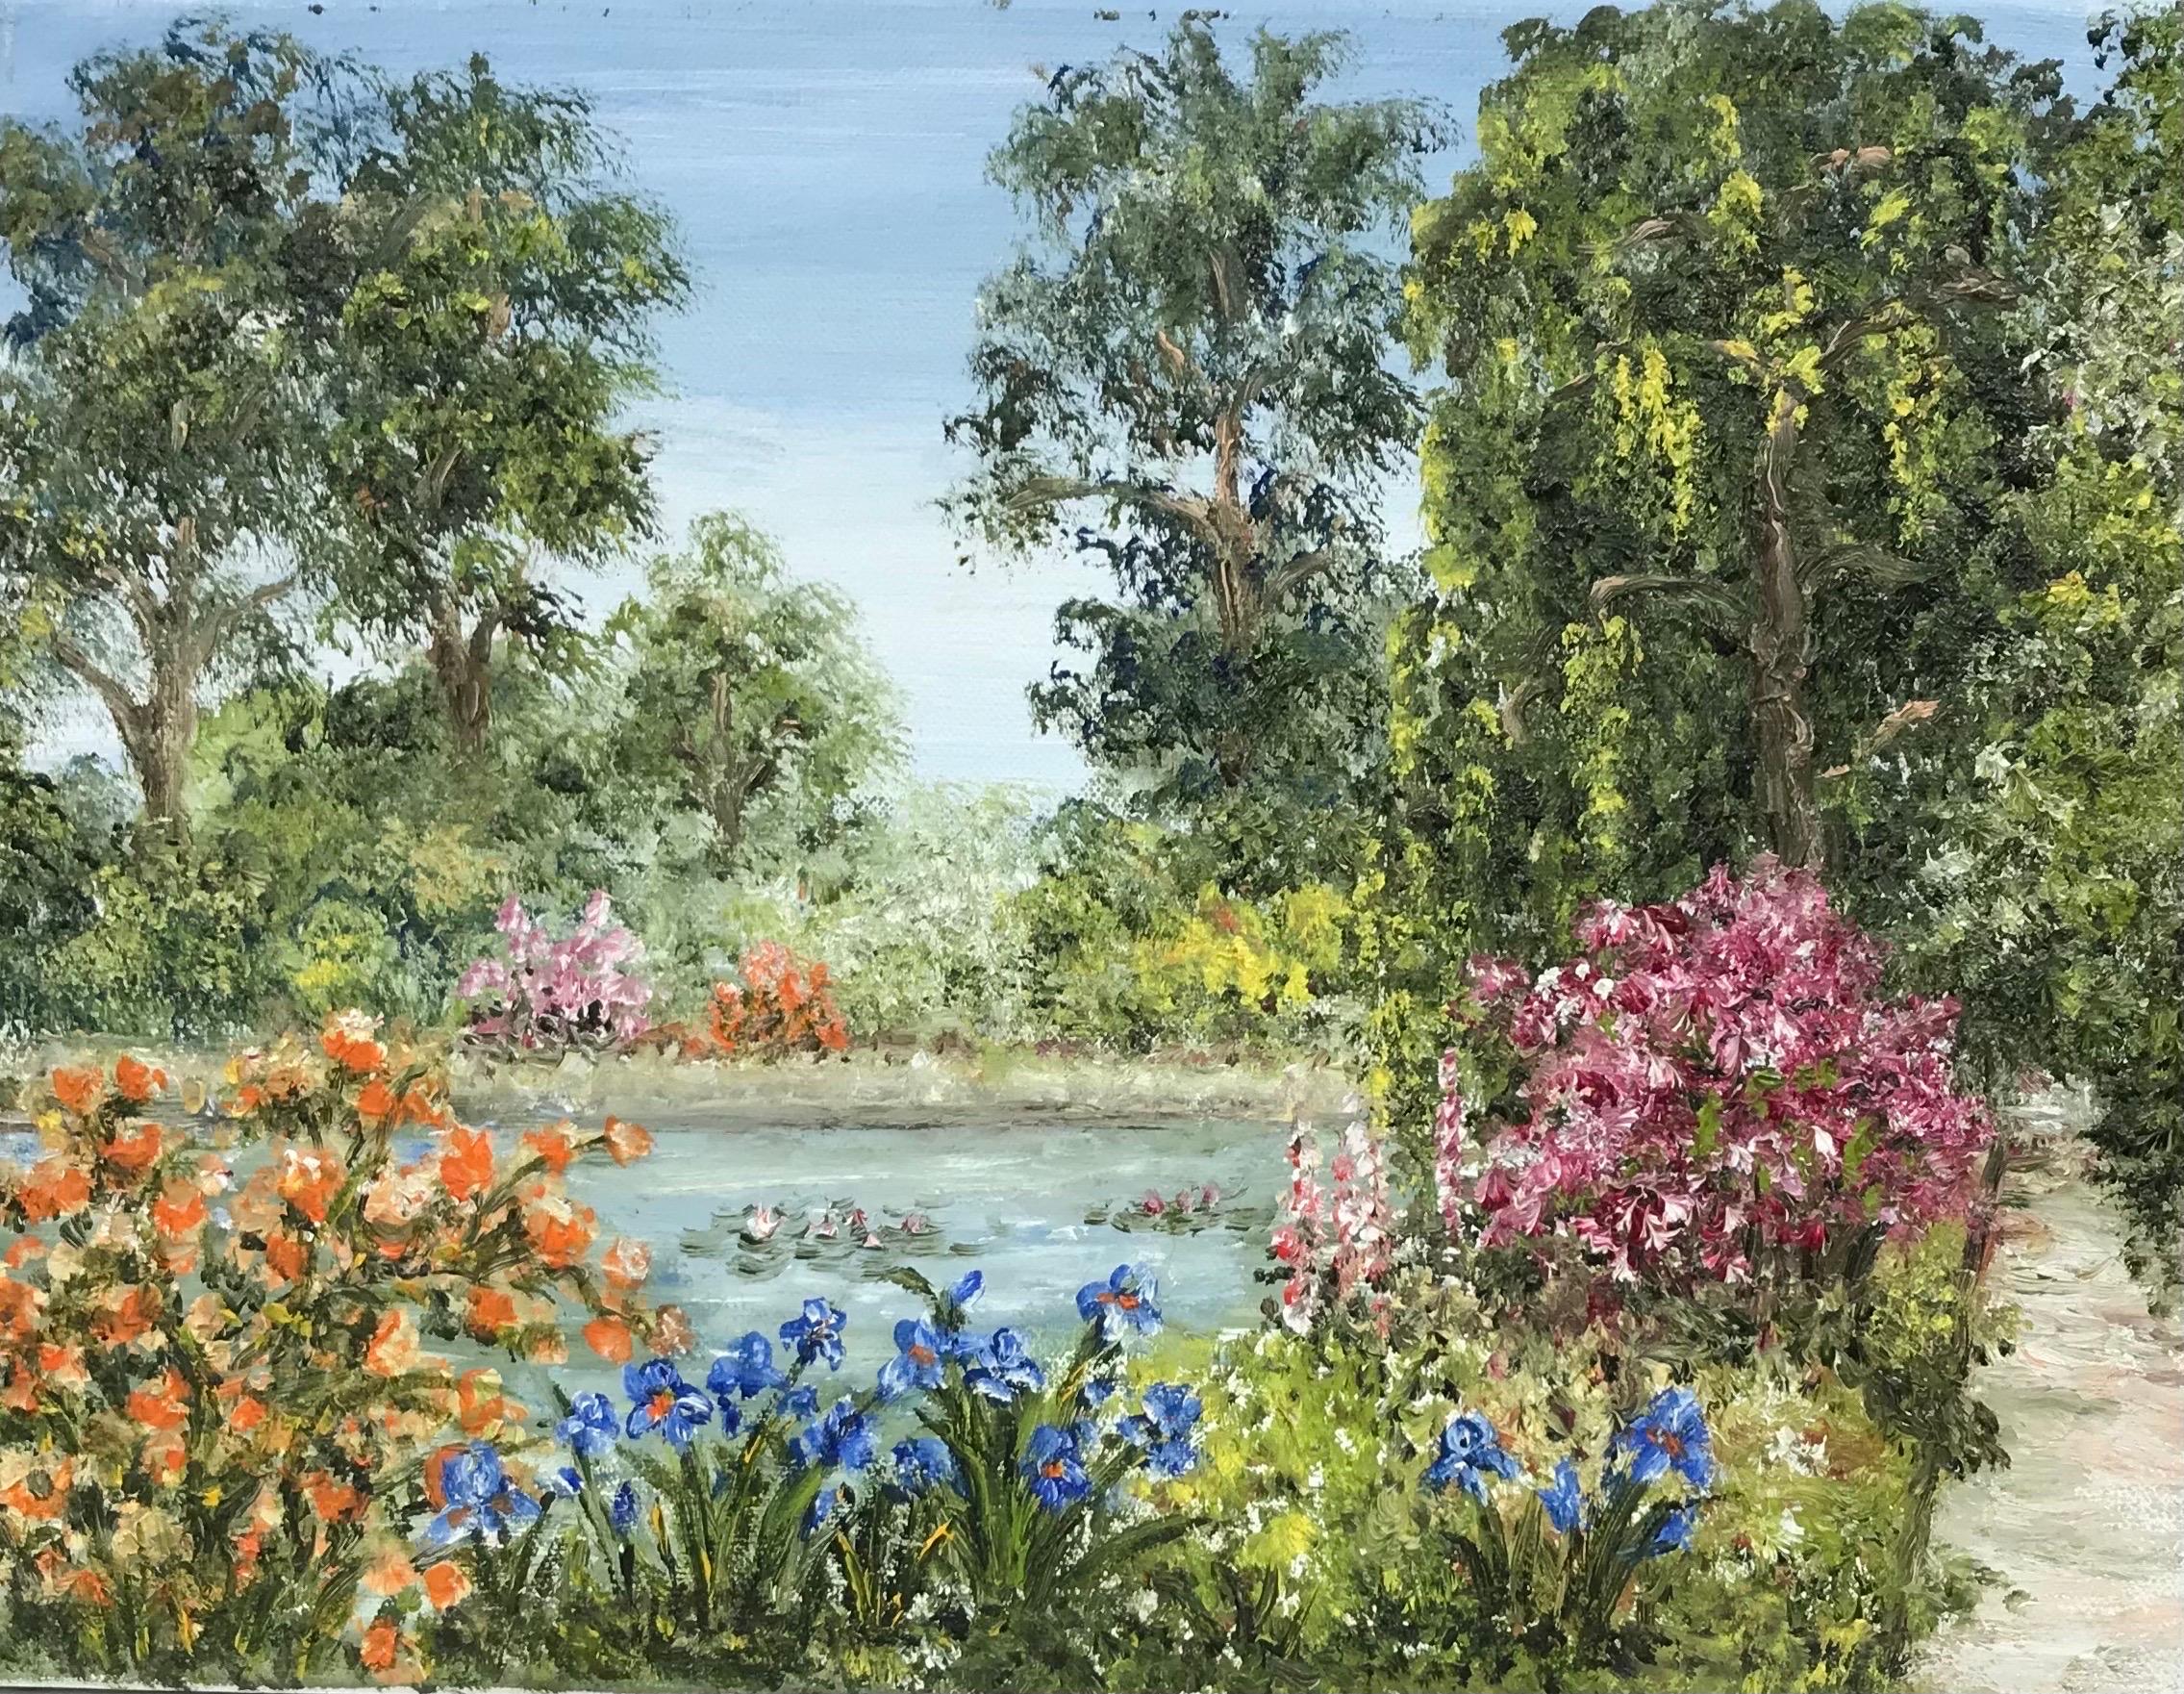 Artist/ School: French School, late 20th century

Title: The Wild Flower Garden

Medium: oil painting on canvas, unframed 

Size:

canvas : 10.5 x 13.75 inches

Provenance: private collection, France

Condition: The painting is in overall very good